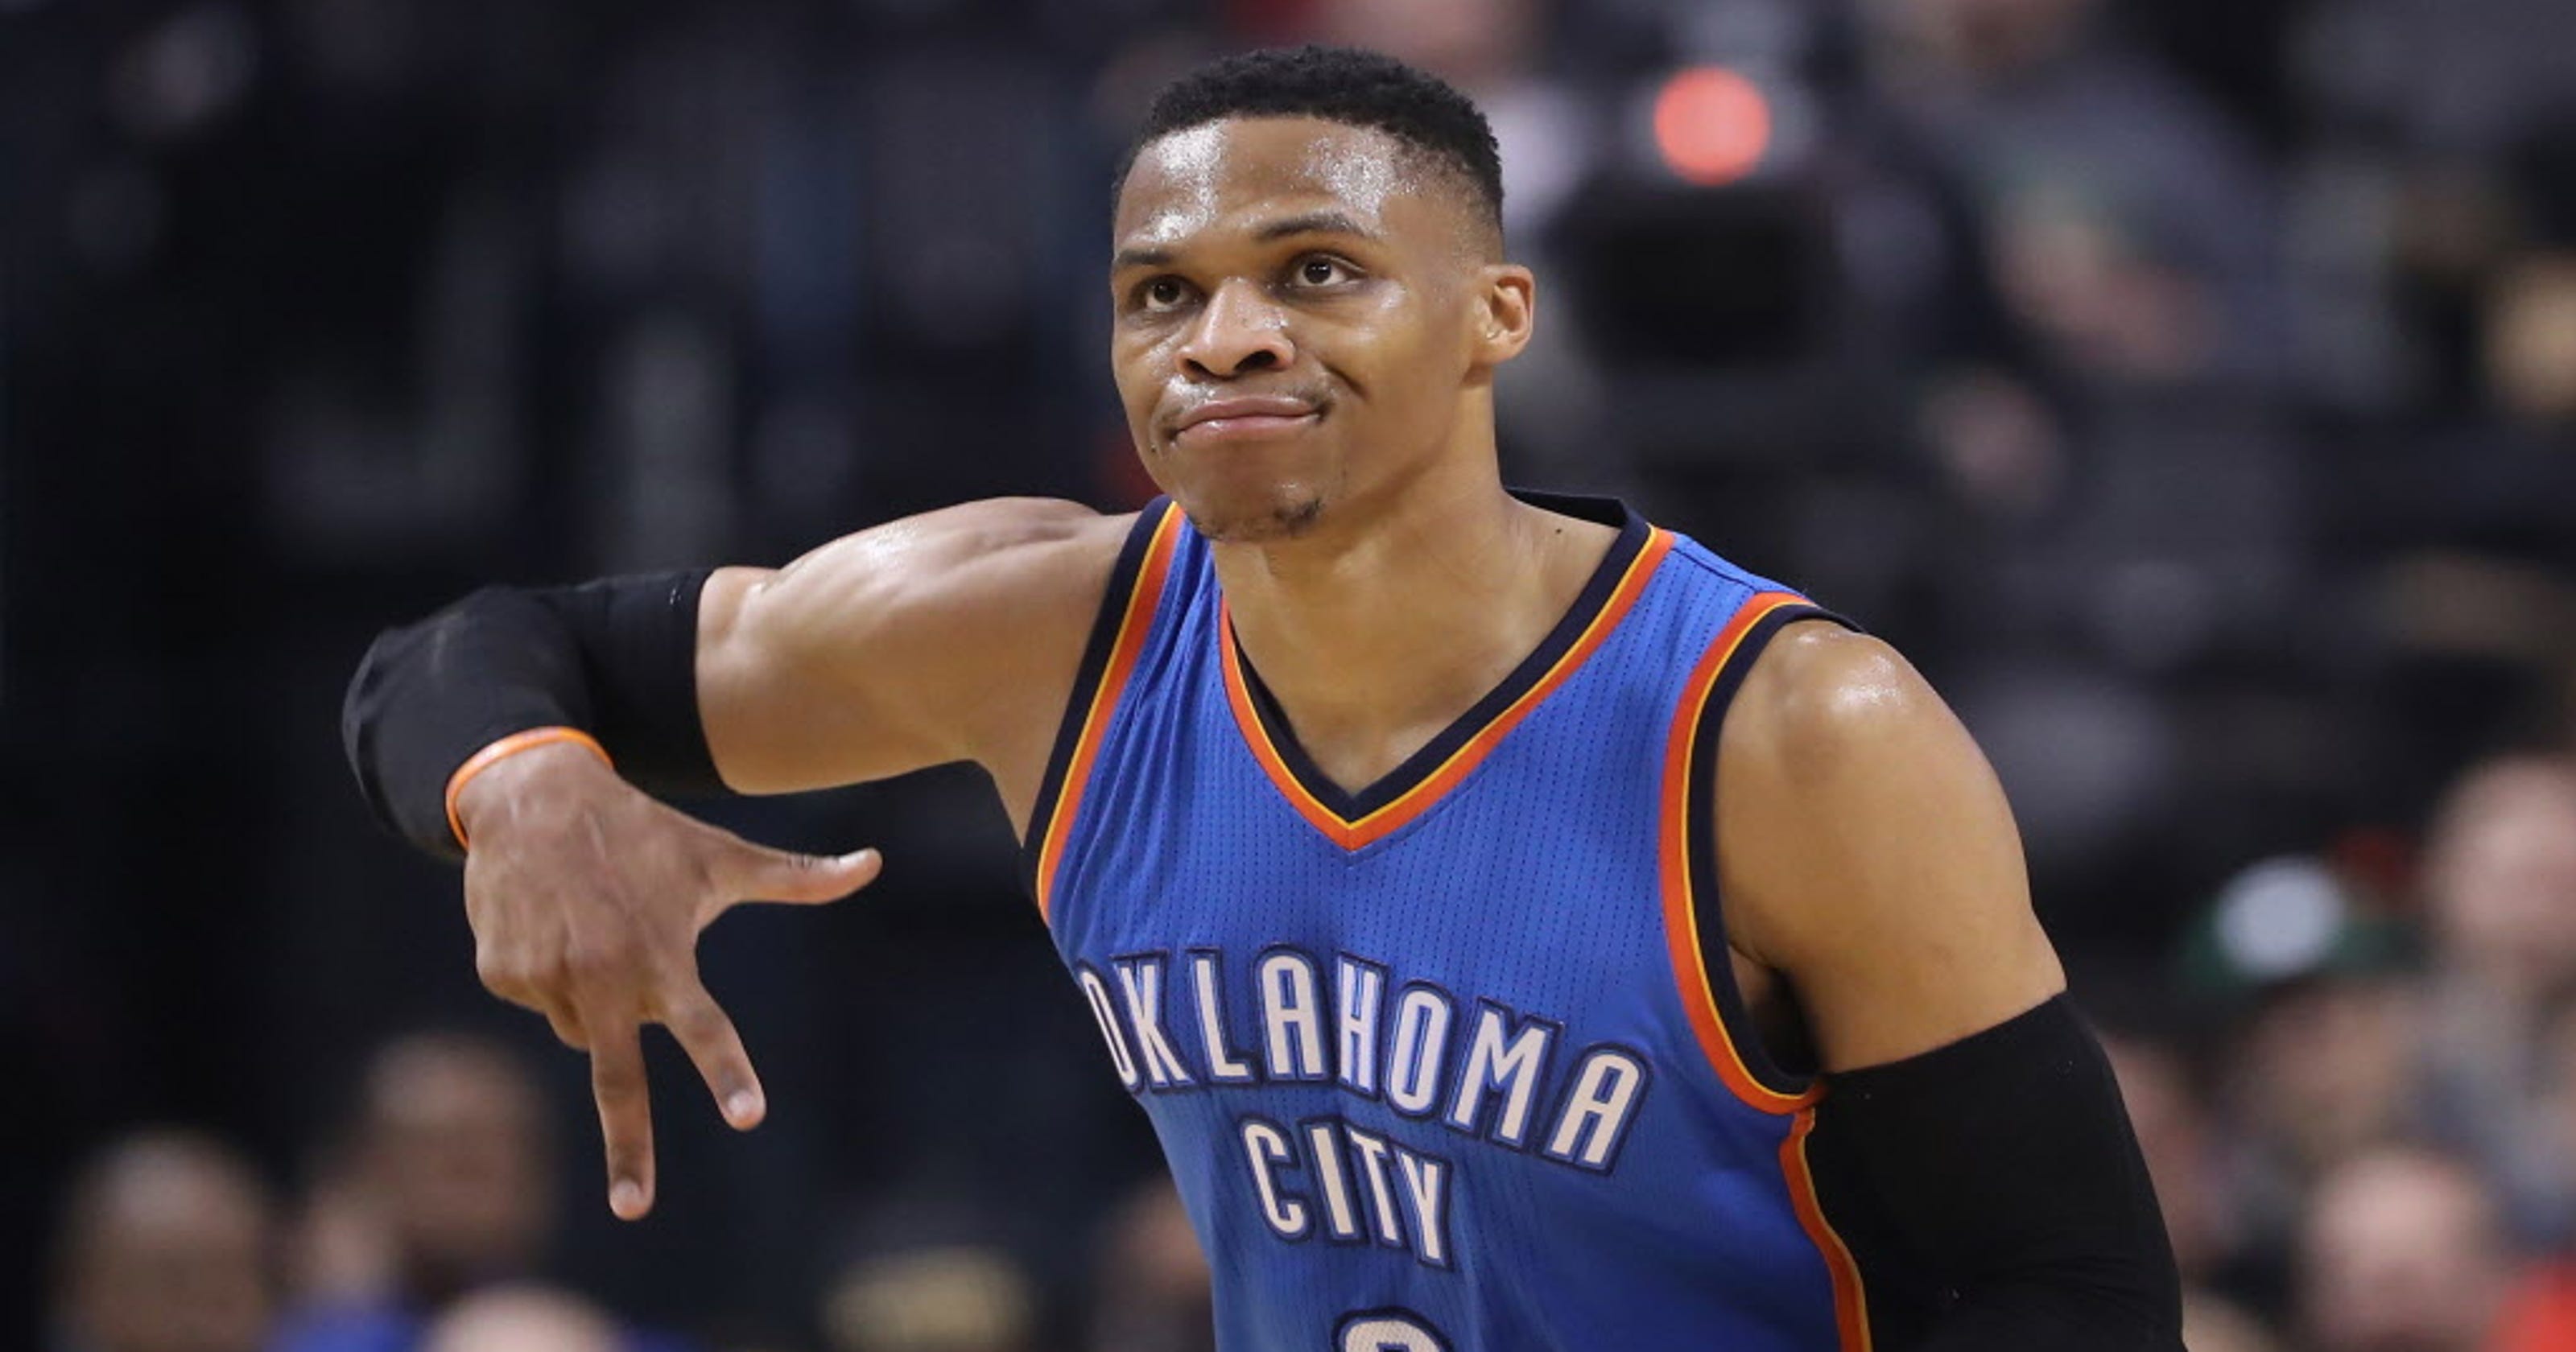 Russell Westbrook's 4th straight triple-double lifts Thunder past Raptors